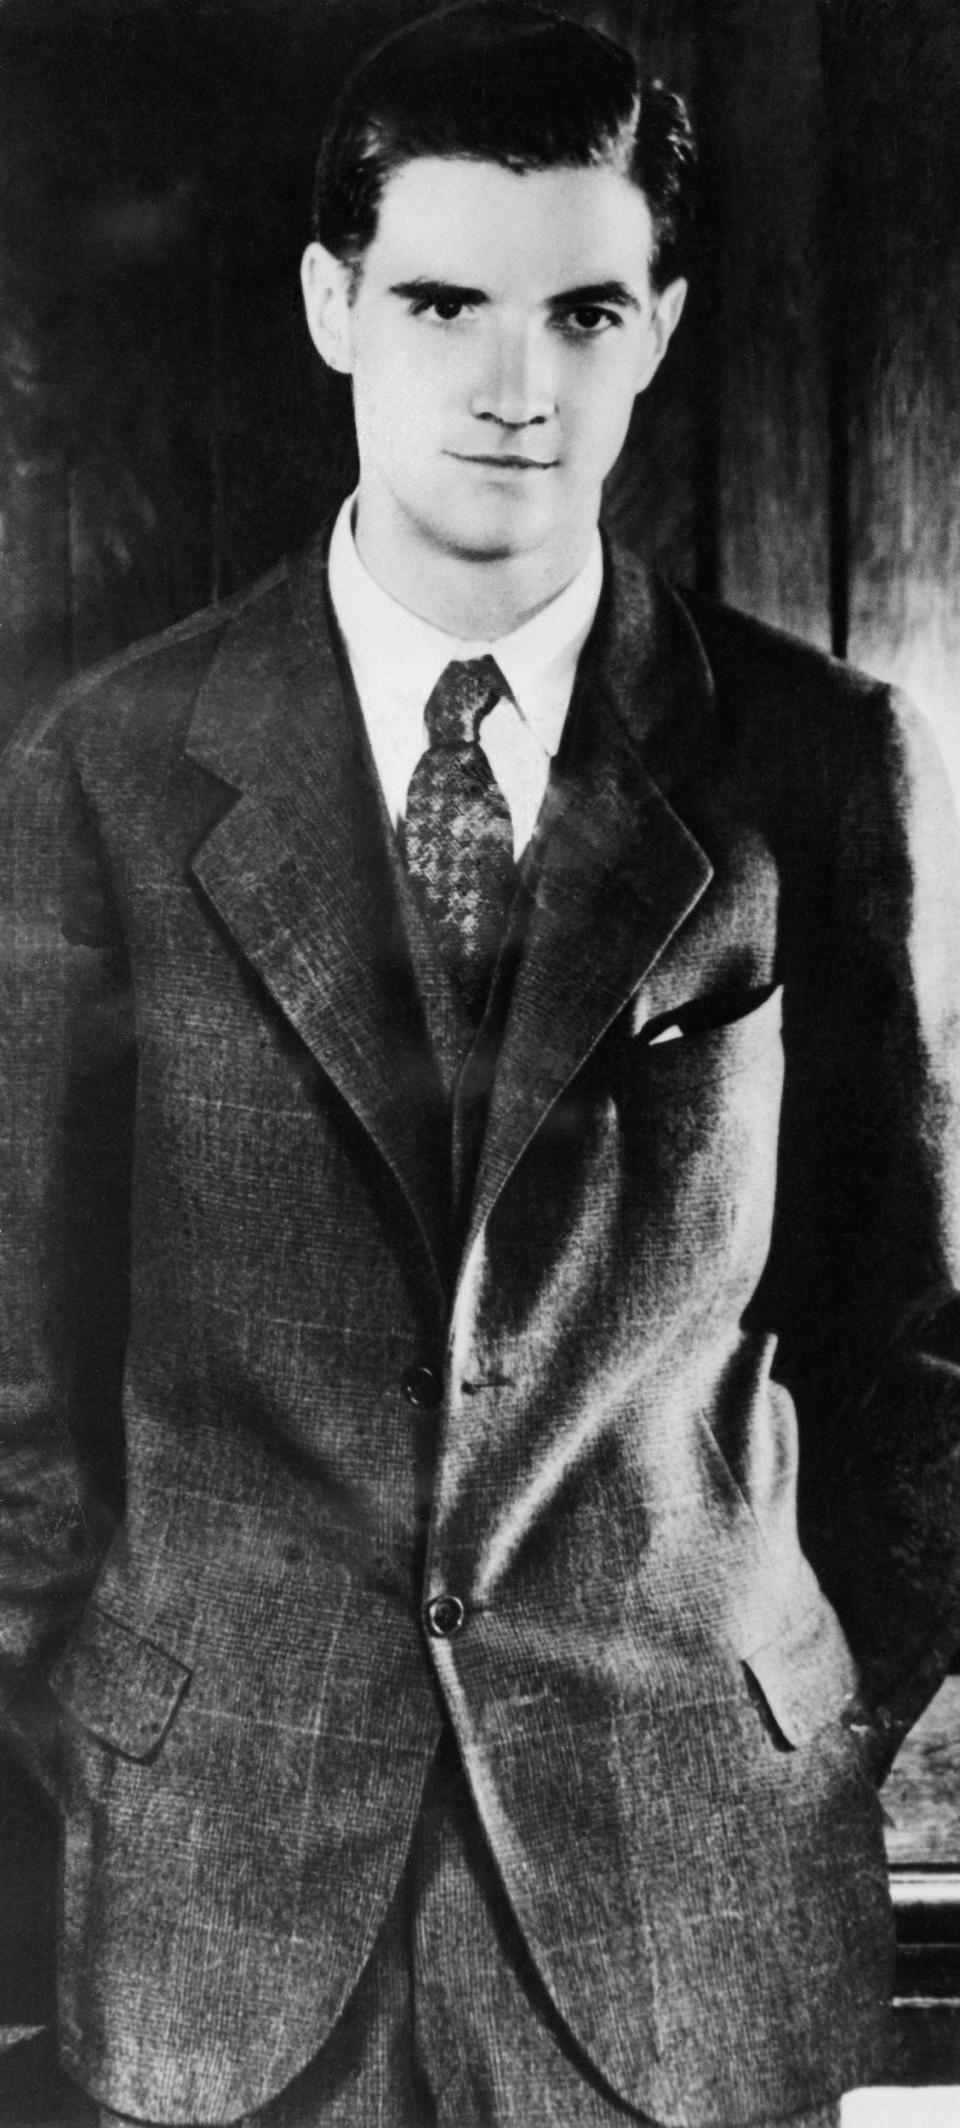 Howard Hughes, record-smashing world flyer, as he appeared at the age of 21